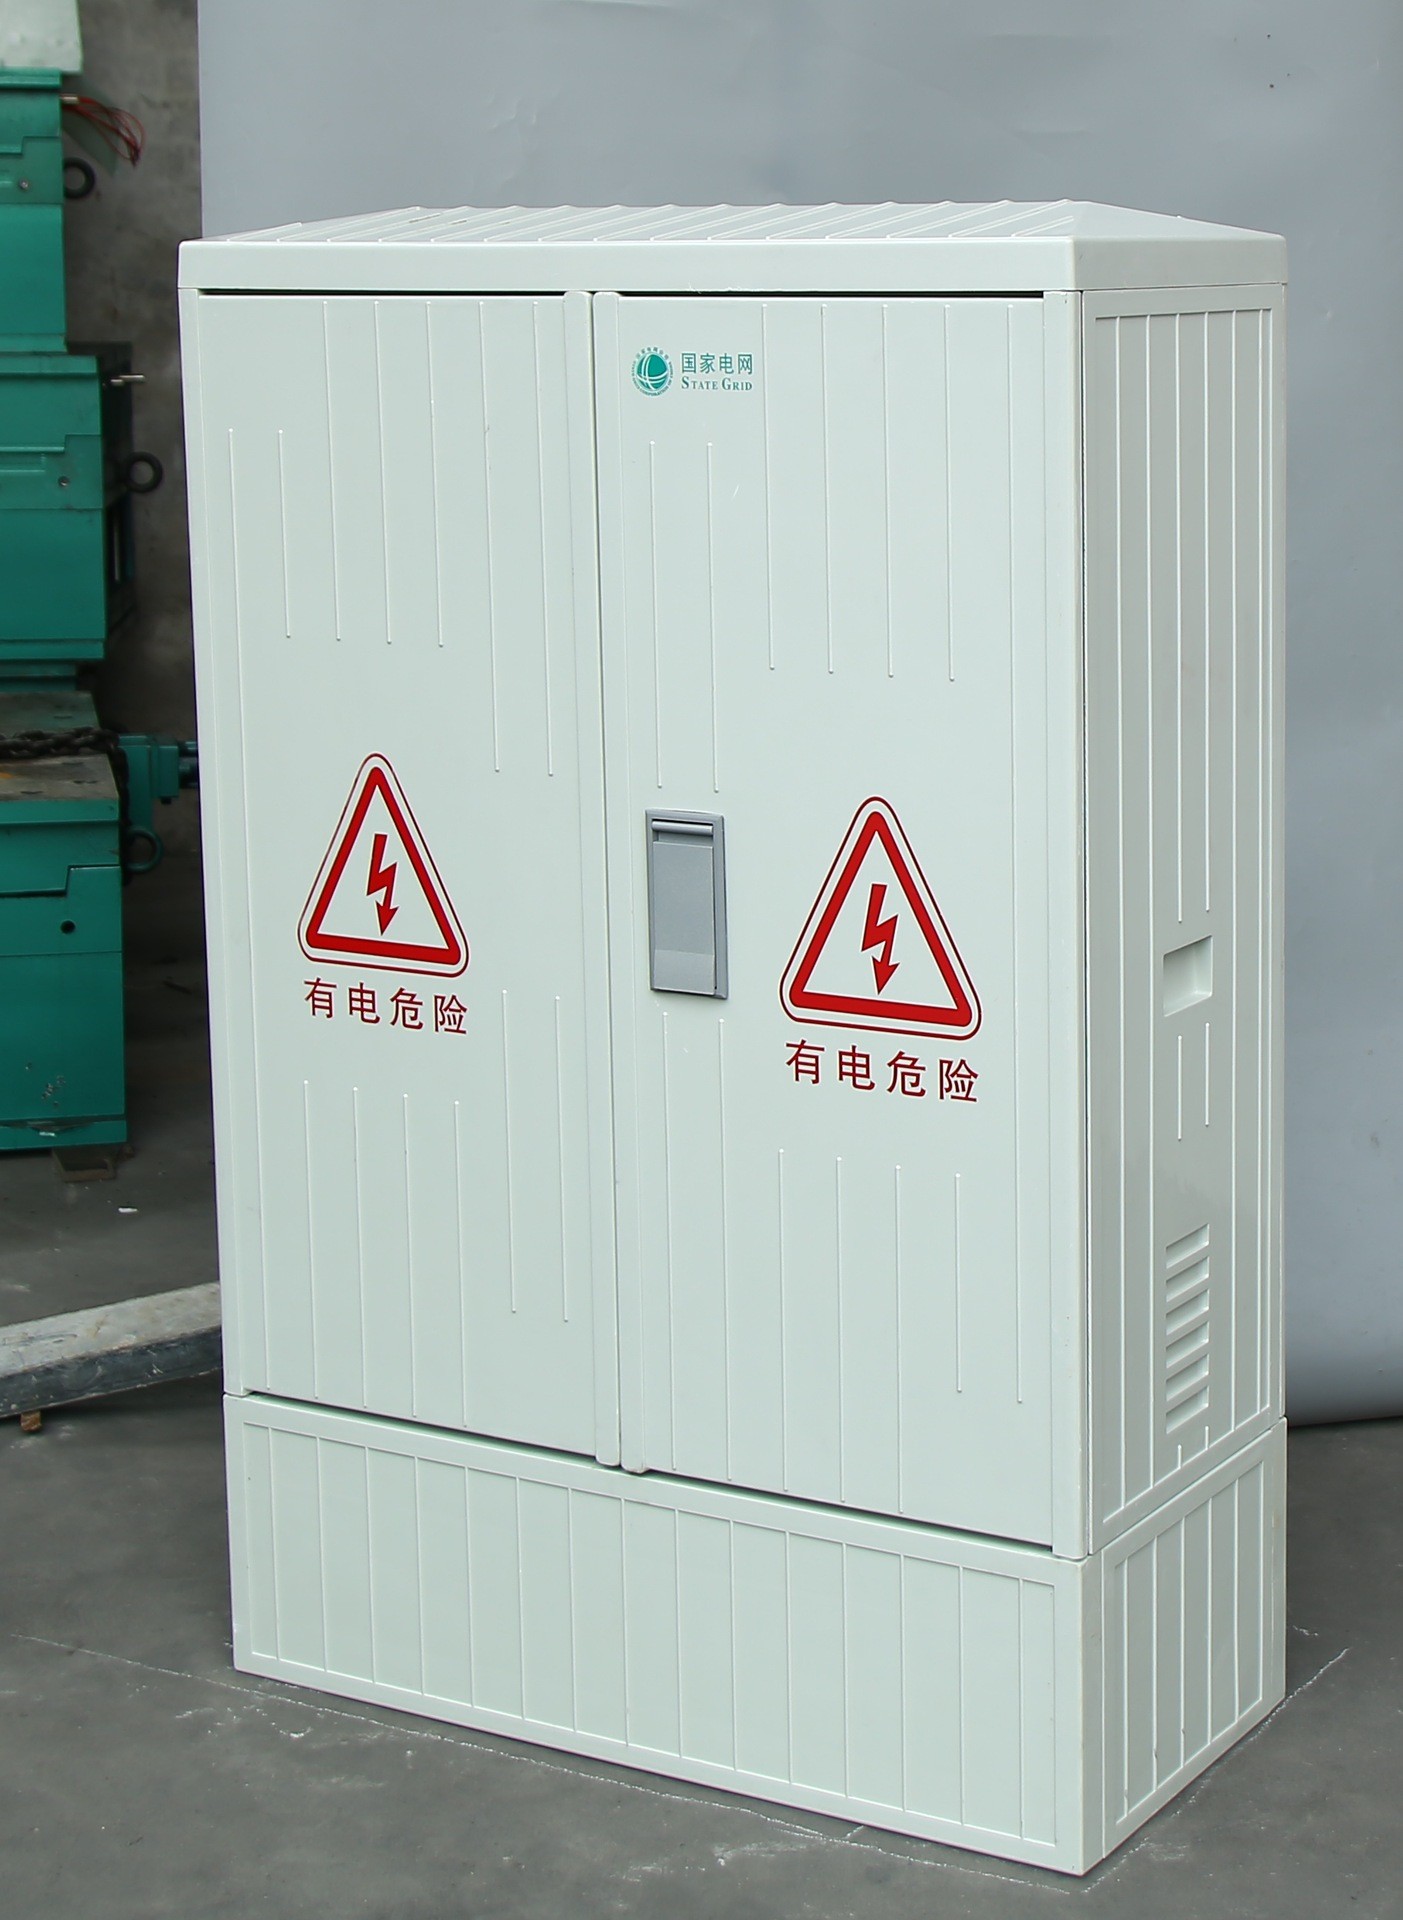  Lockable Free Standing Enclosure Box Of Polyester SMC Fiber Glass Material Manufactures